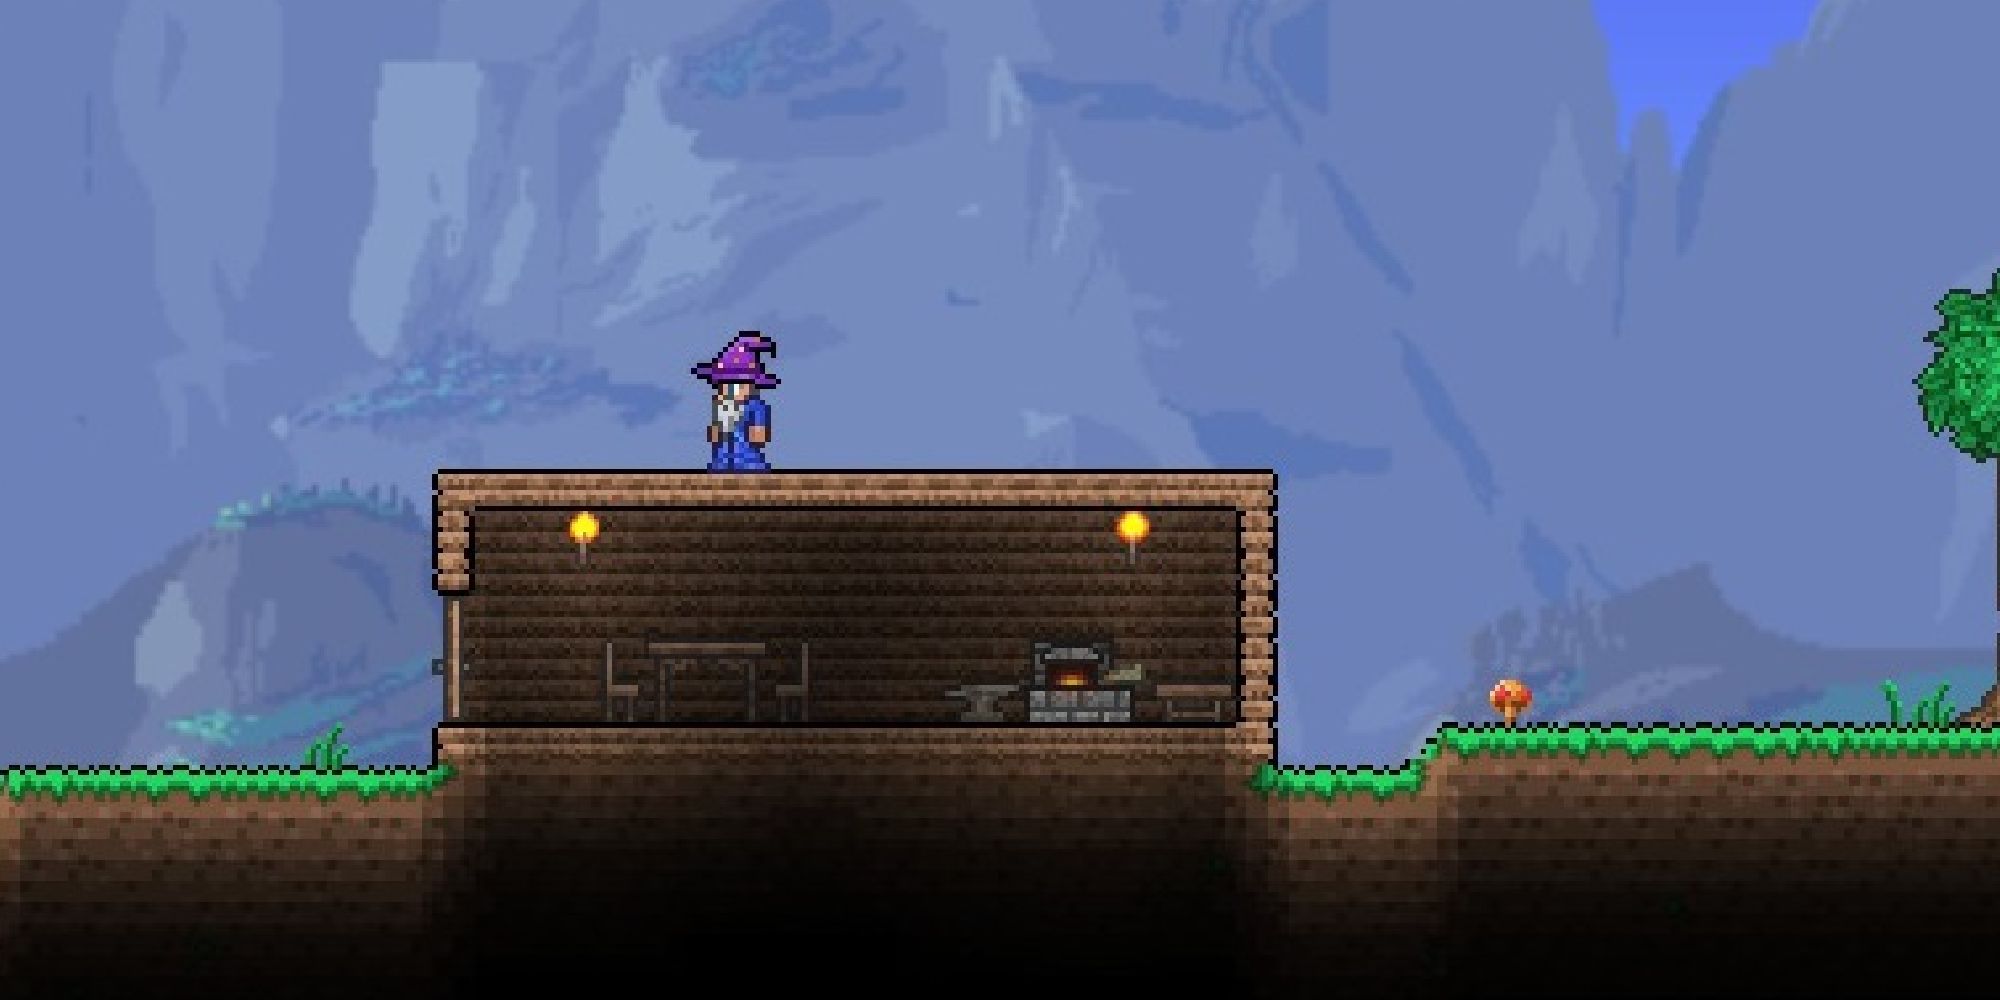 terraria starter house with mage type character standing on top